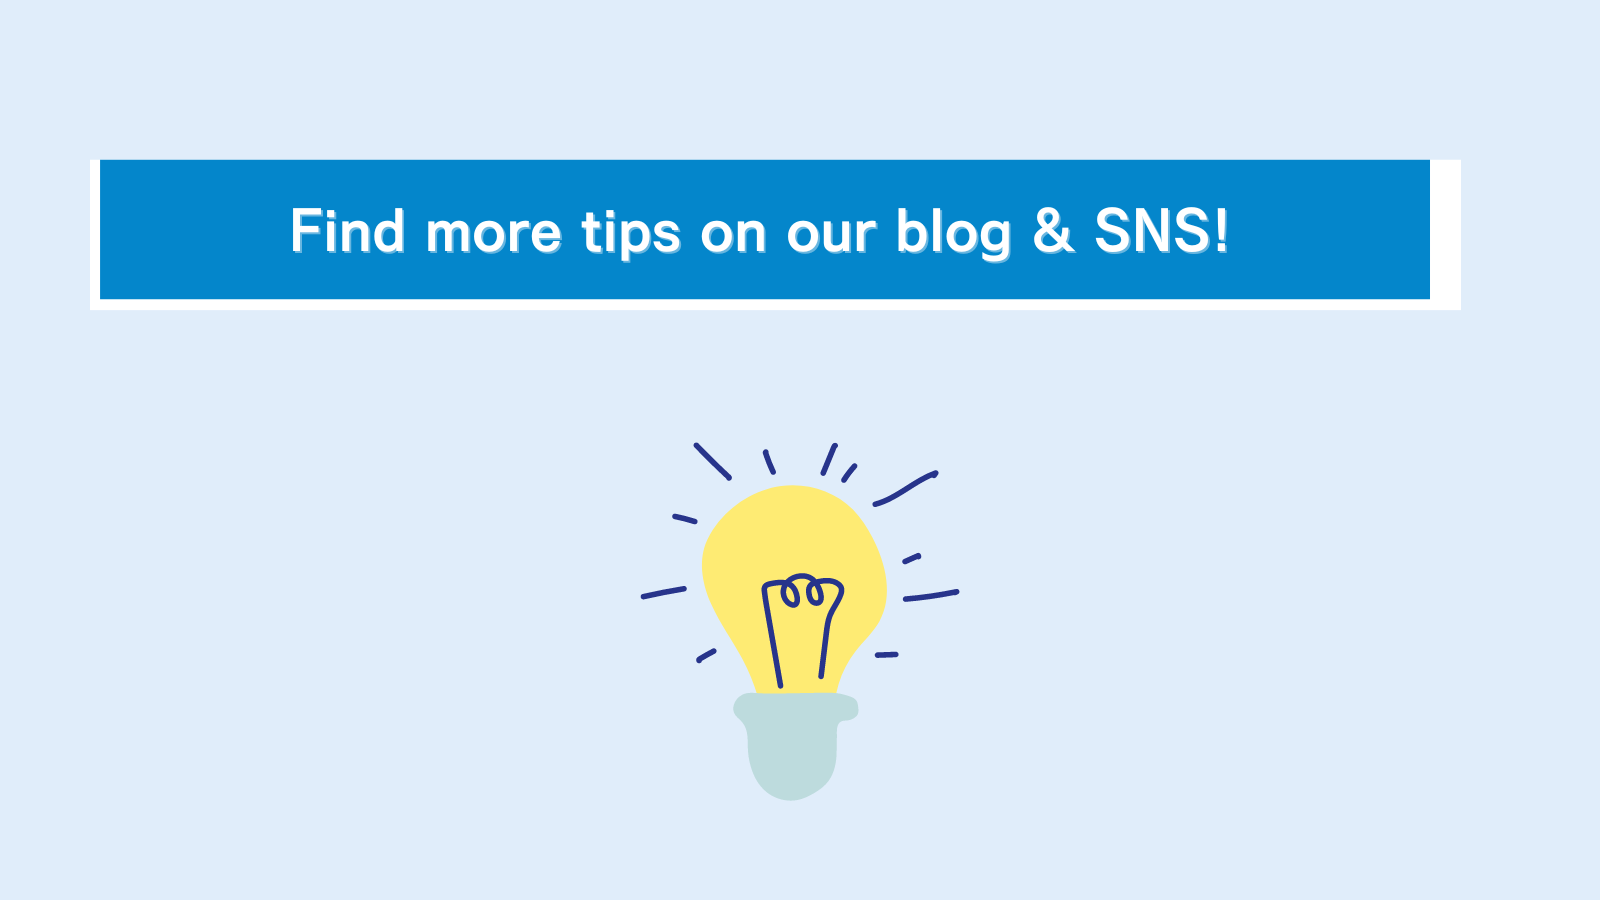 Find more tips on blog and SNS